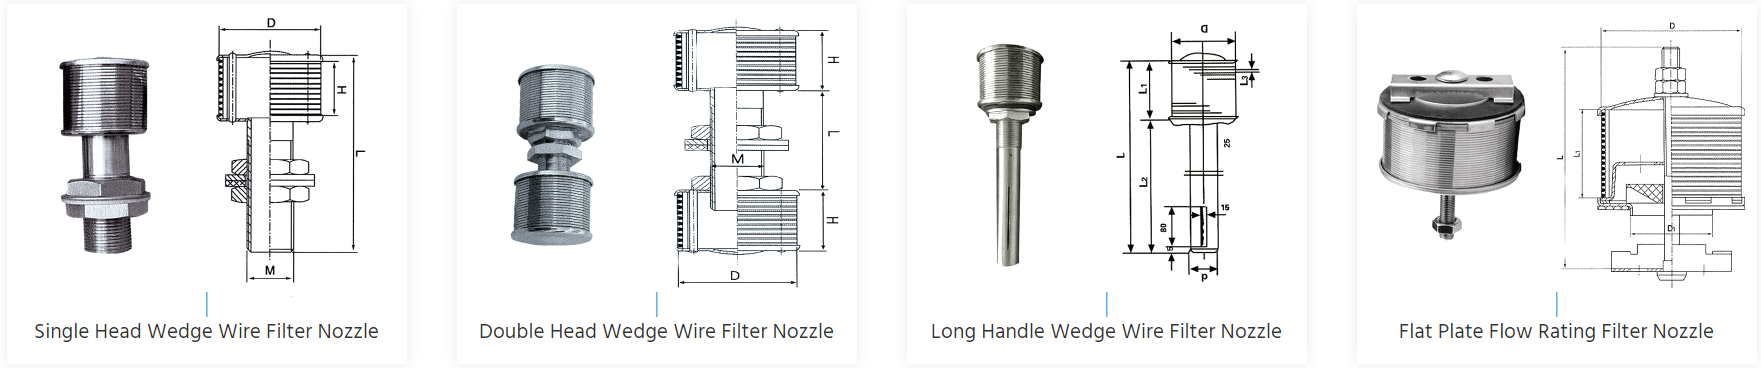 stainless steel water filter nozzle types